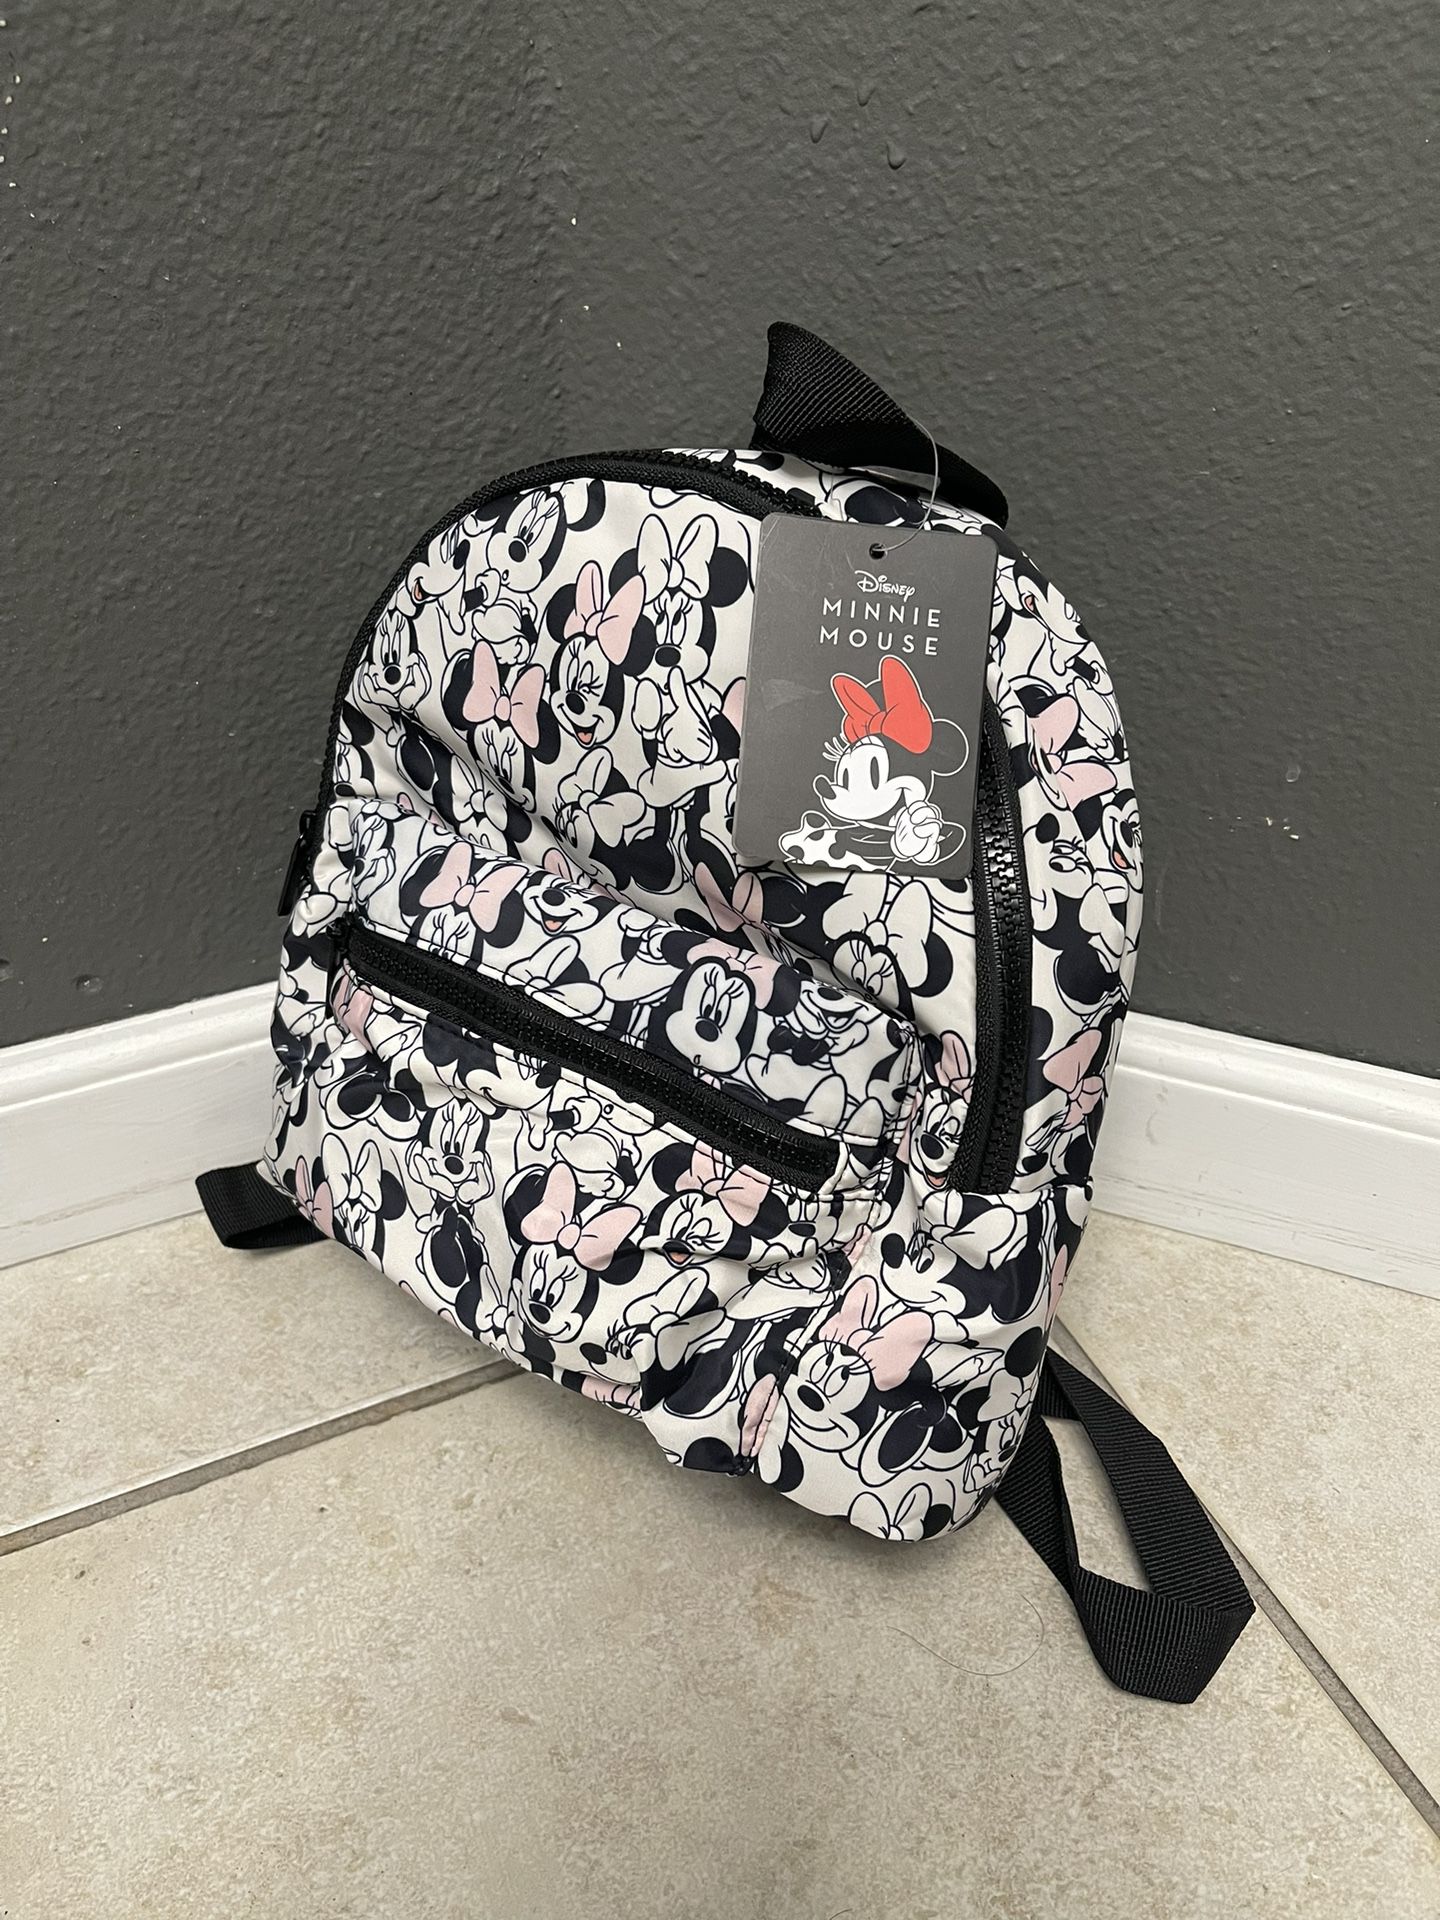 New Minnie Mouse Backpack